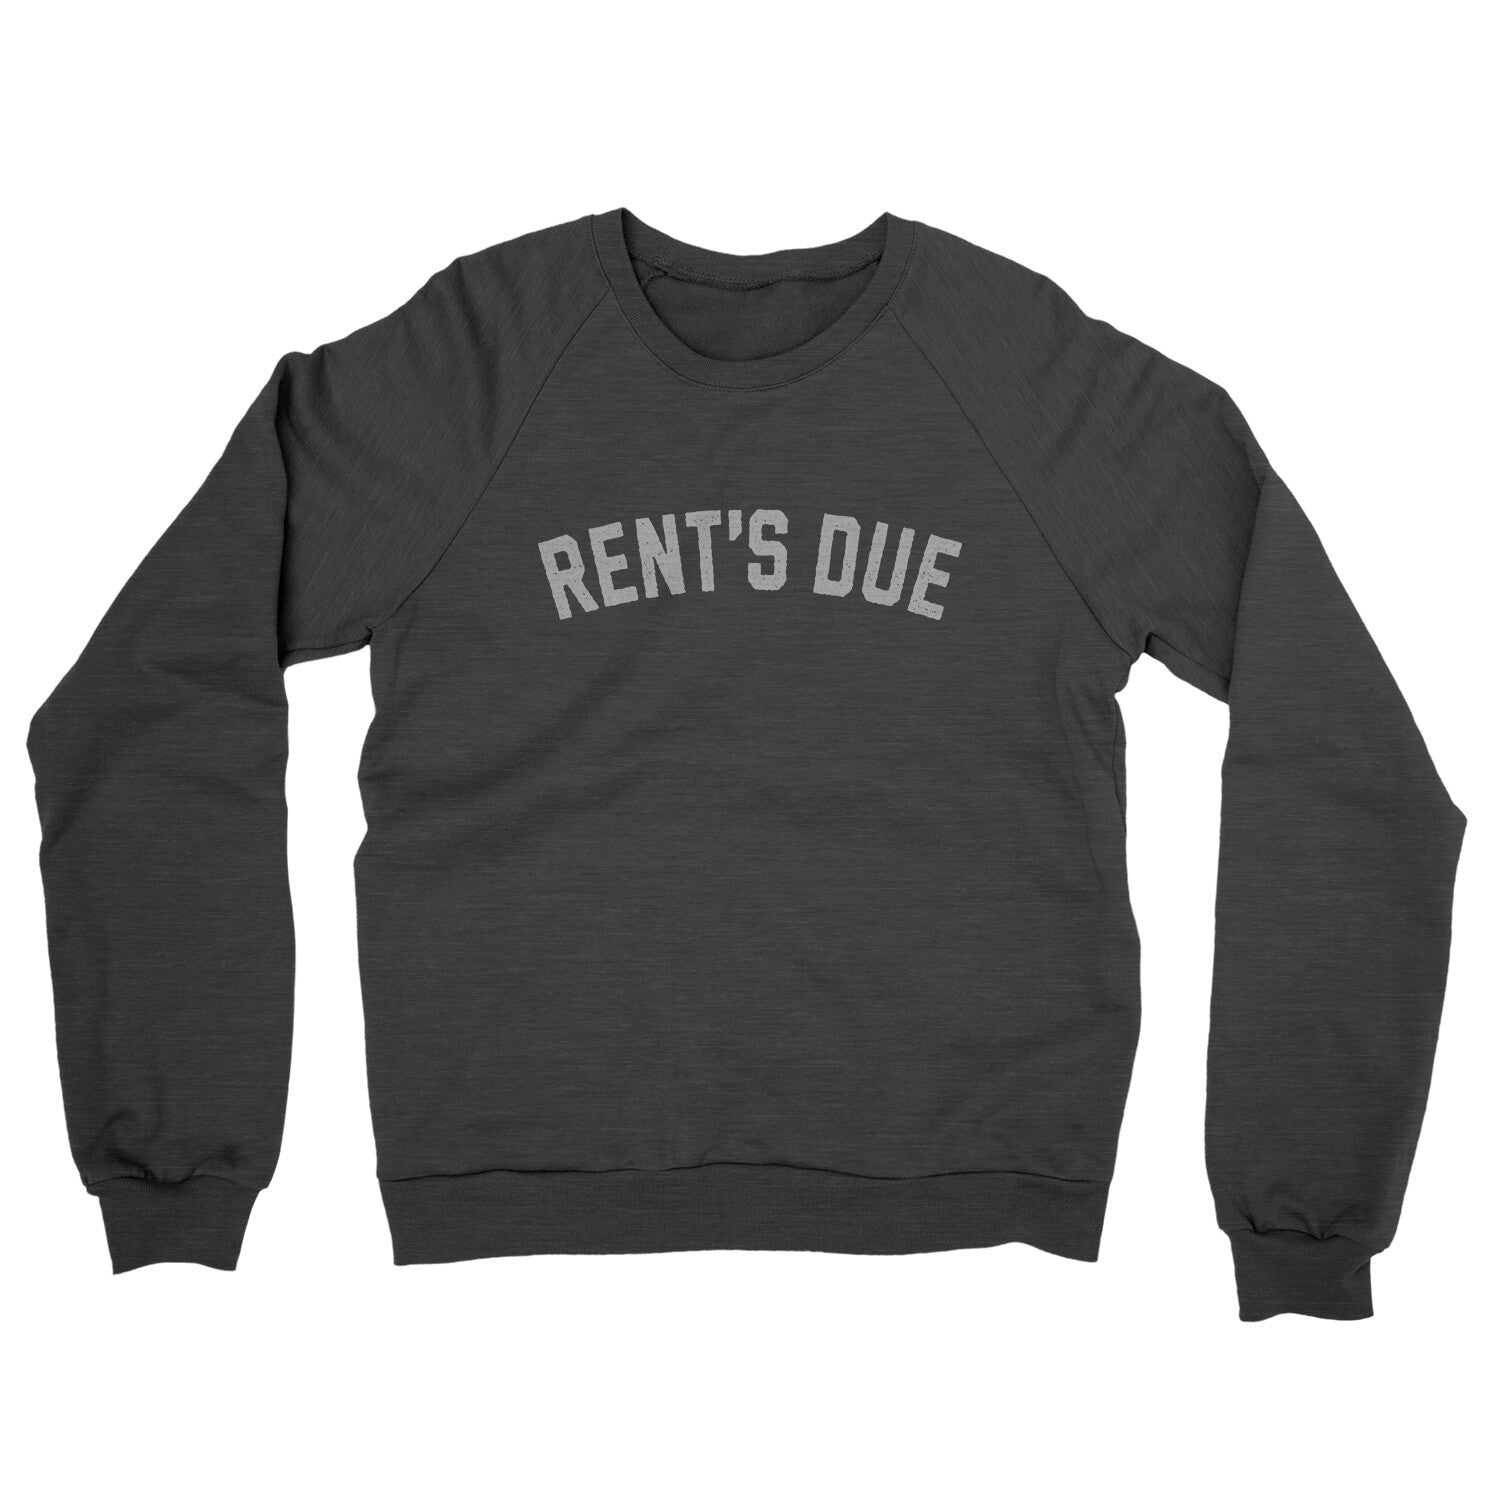 Rent's Due in Charcoal Heather Color